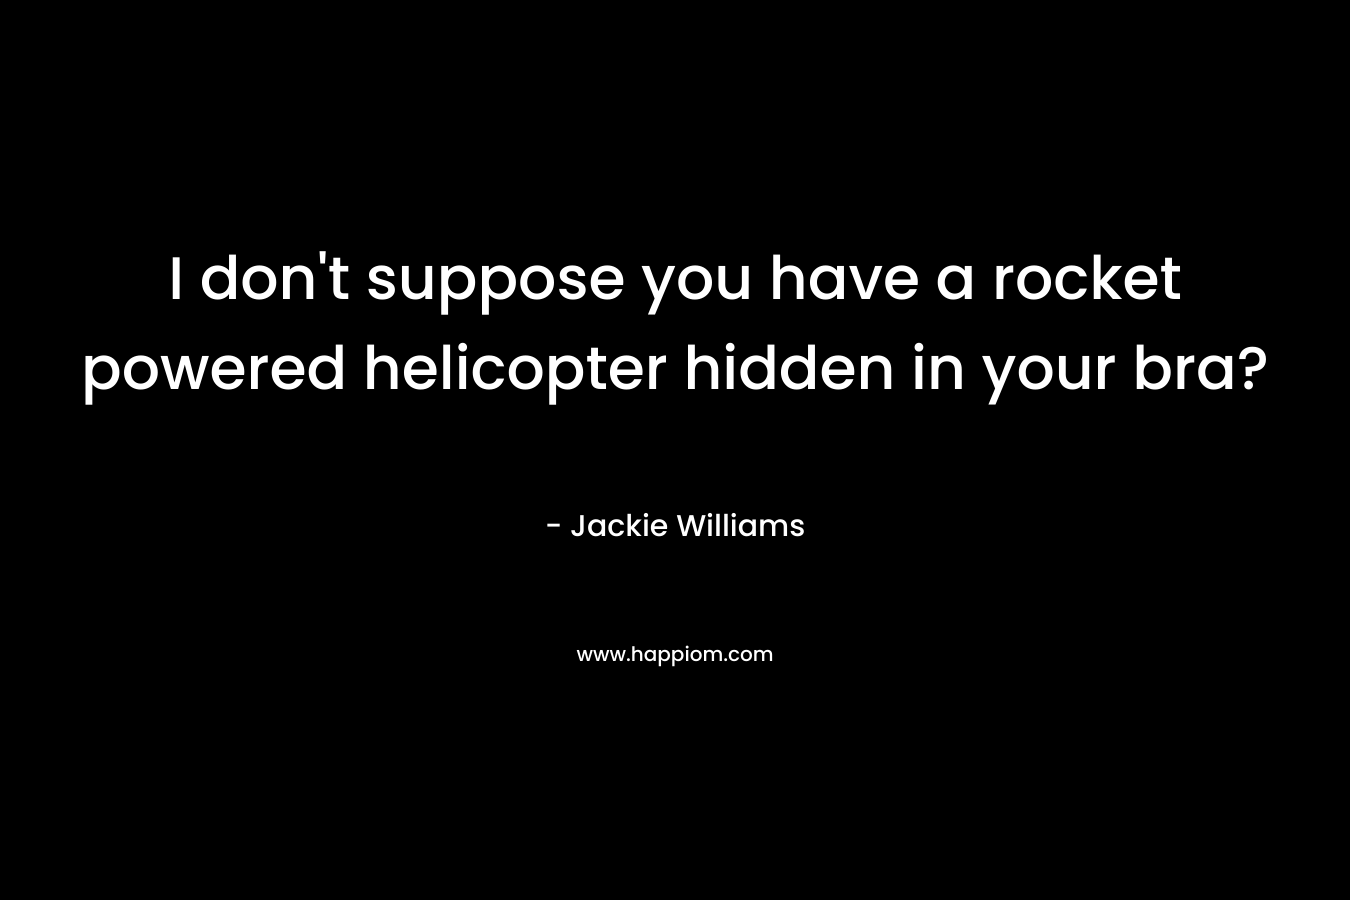 I don't suppose you have a rocket powered helicopter hidden in your bra?